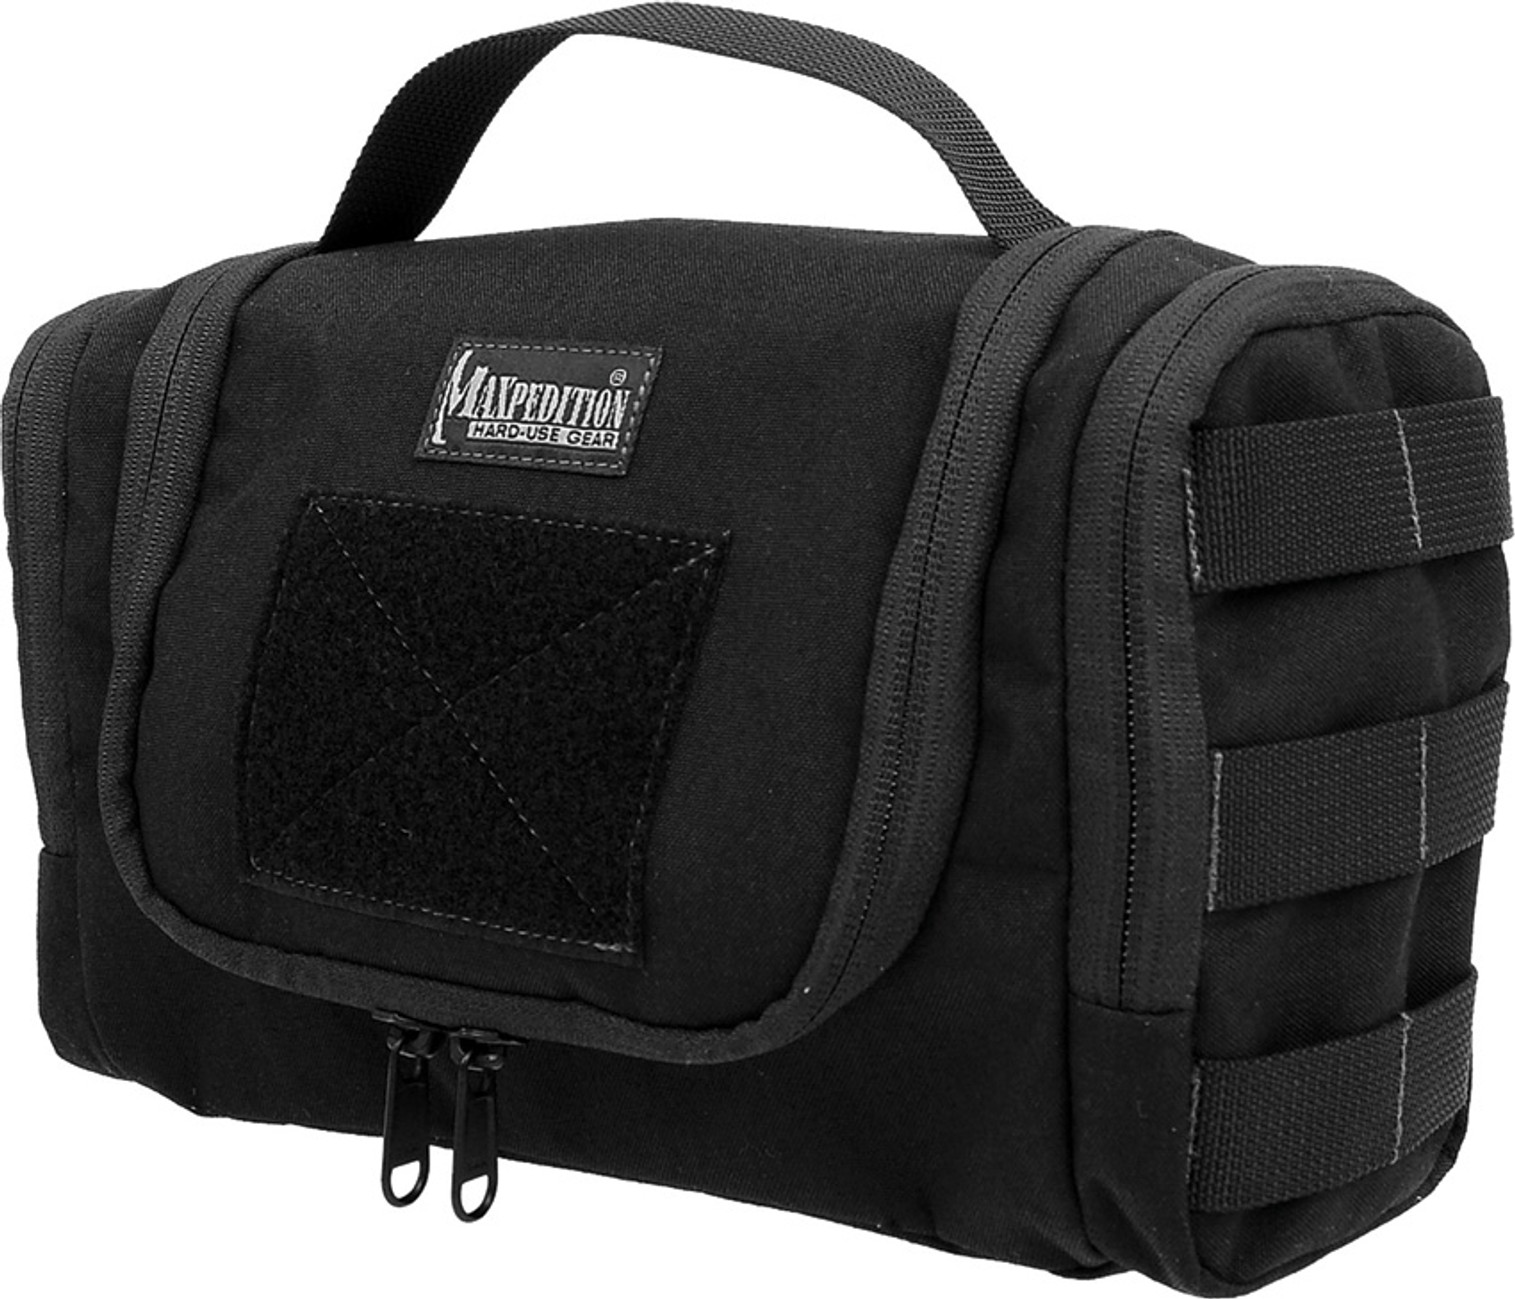 Aftermath Compact Toiletry Bag MX1817B